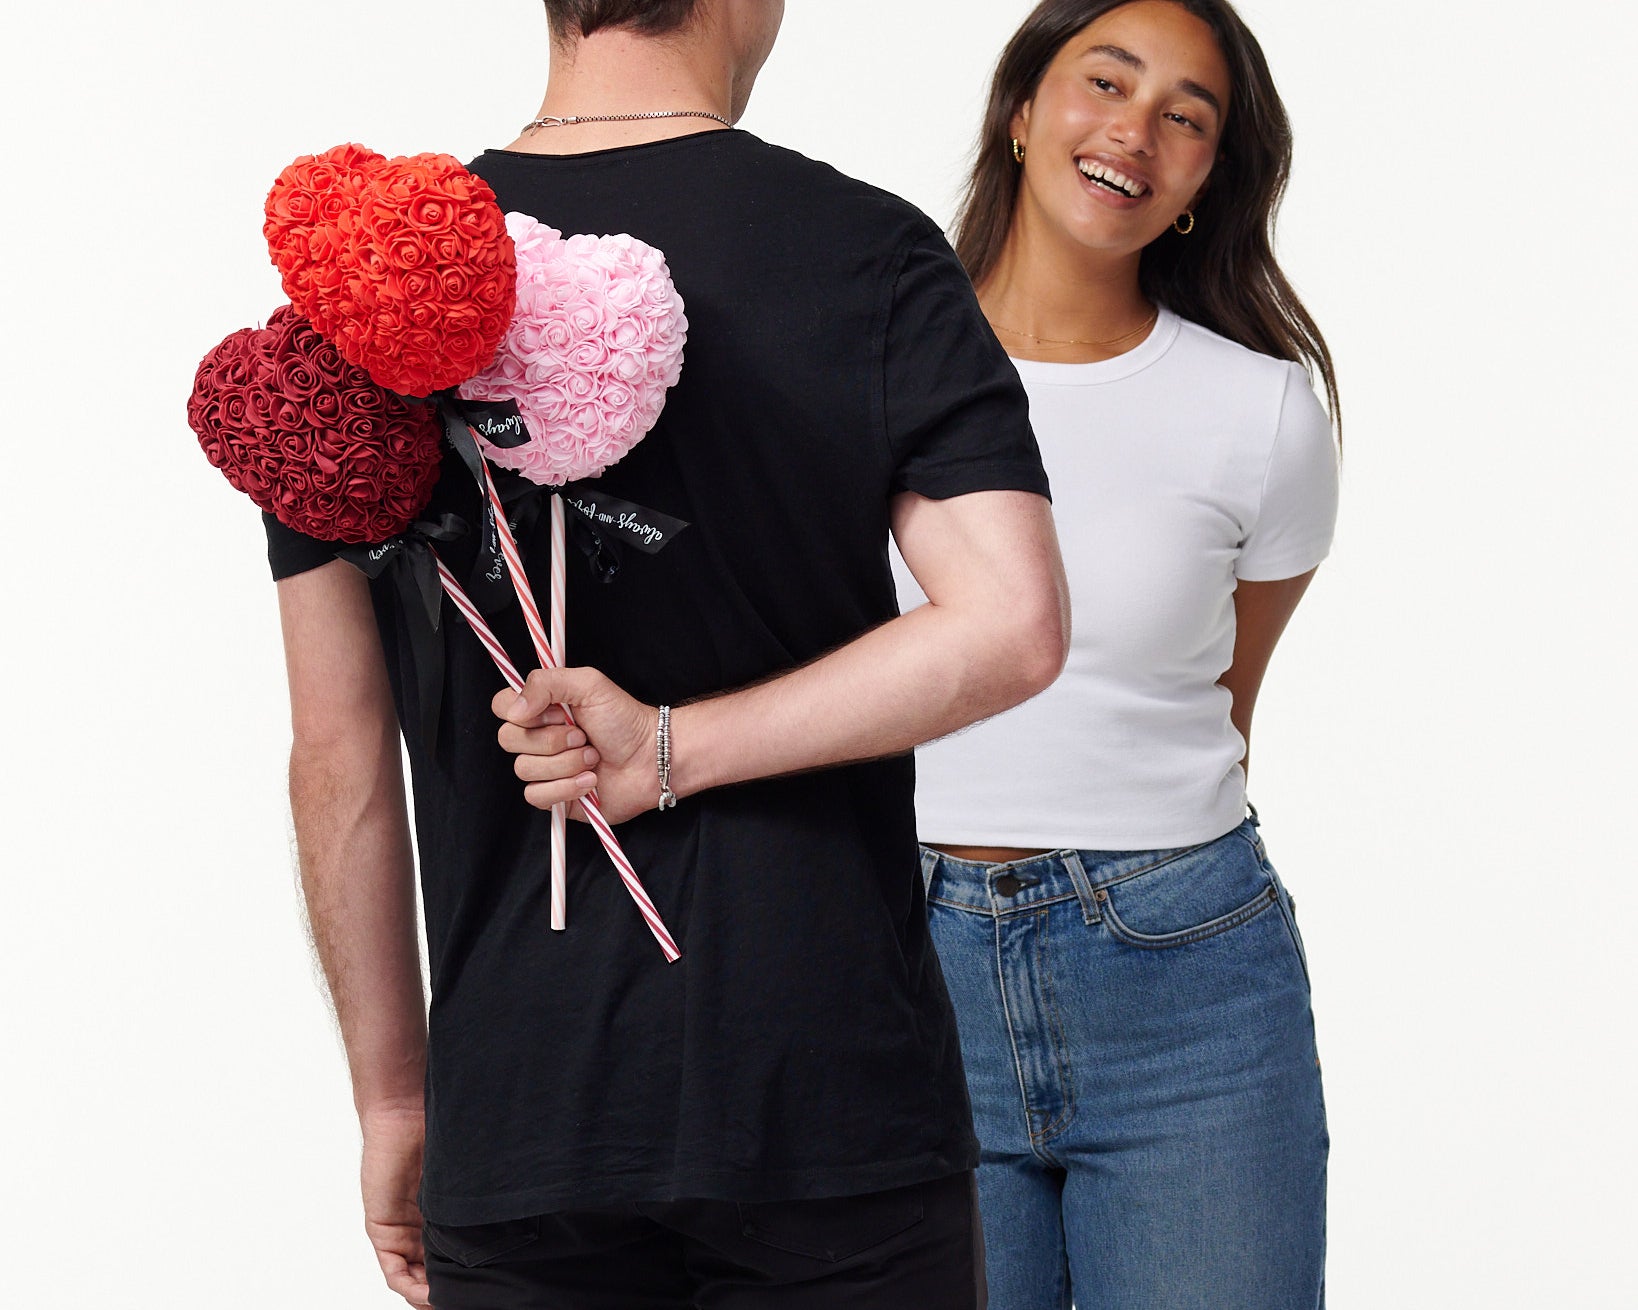 The image shows a male model in a black T-shirt, seen from behind, holding three artificial flower lollipops of red, pink, and burgundy behind his back, with a white female model in a white T-shirt and blue jeans smiling and facing him, seemingly unaware of the surprise. The lollipops have a striped stick with a bow, suggesting a playful or romantic gesture.